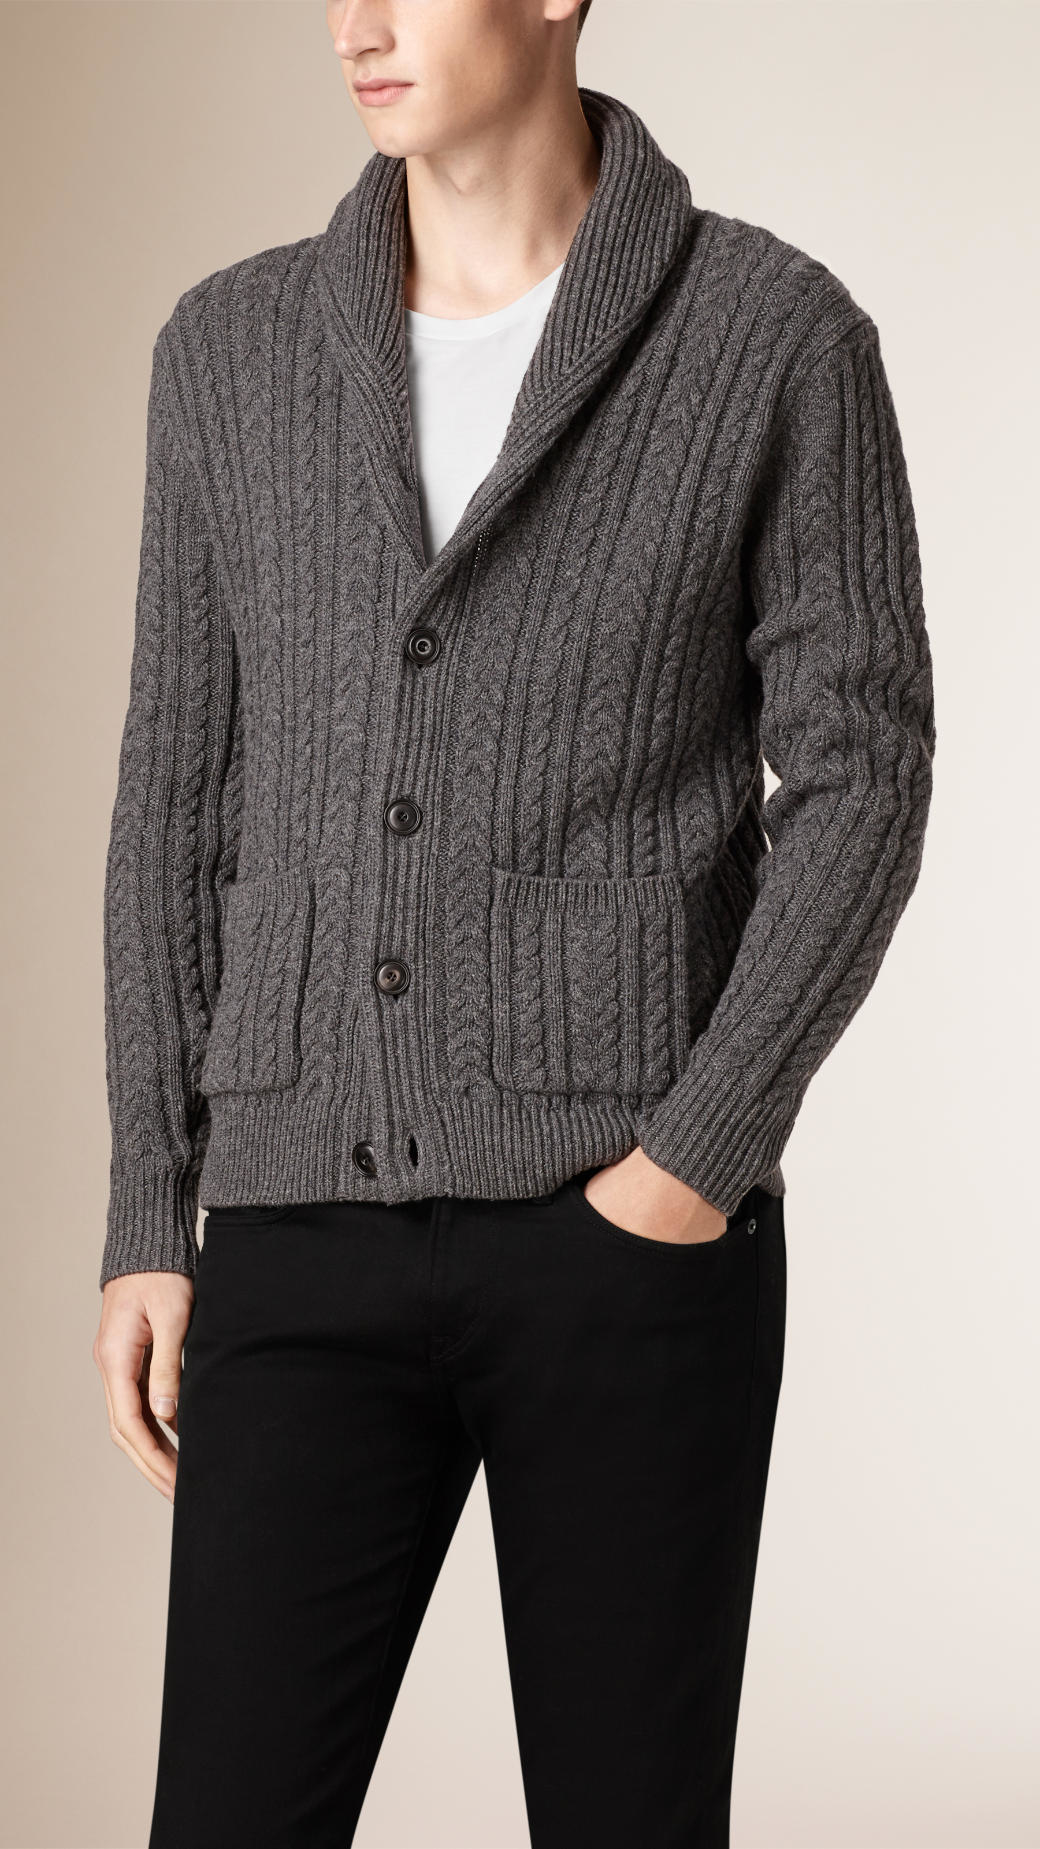 Lyst - Burberry Shawl Collar Wool Cashmere Cardigan in Gray for Men